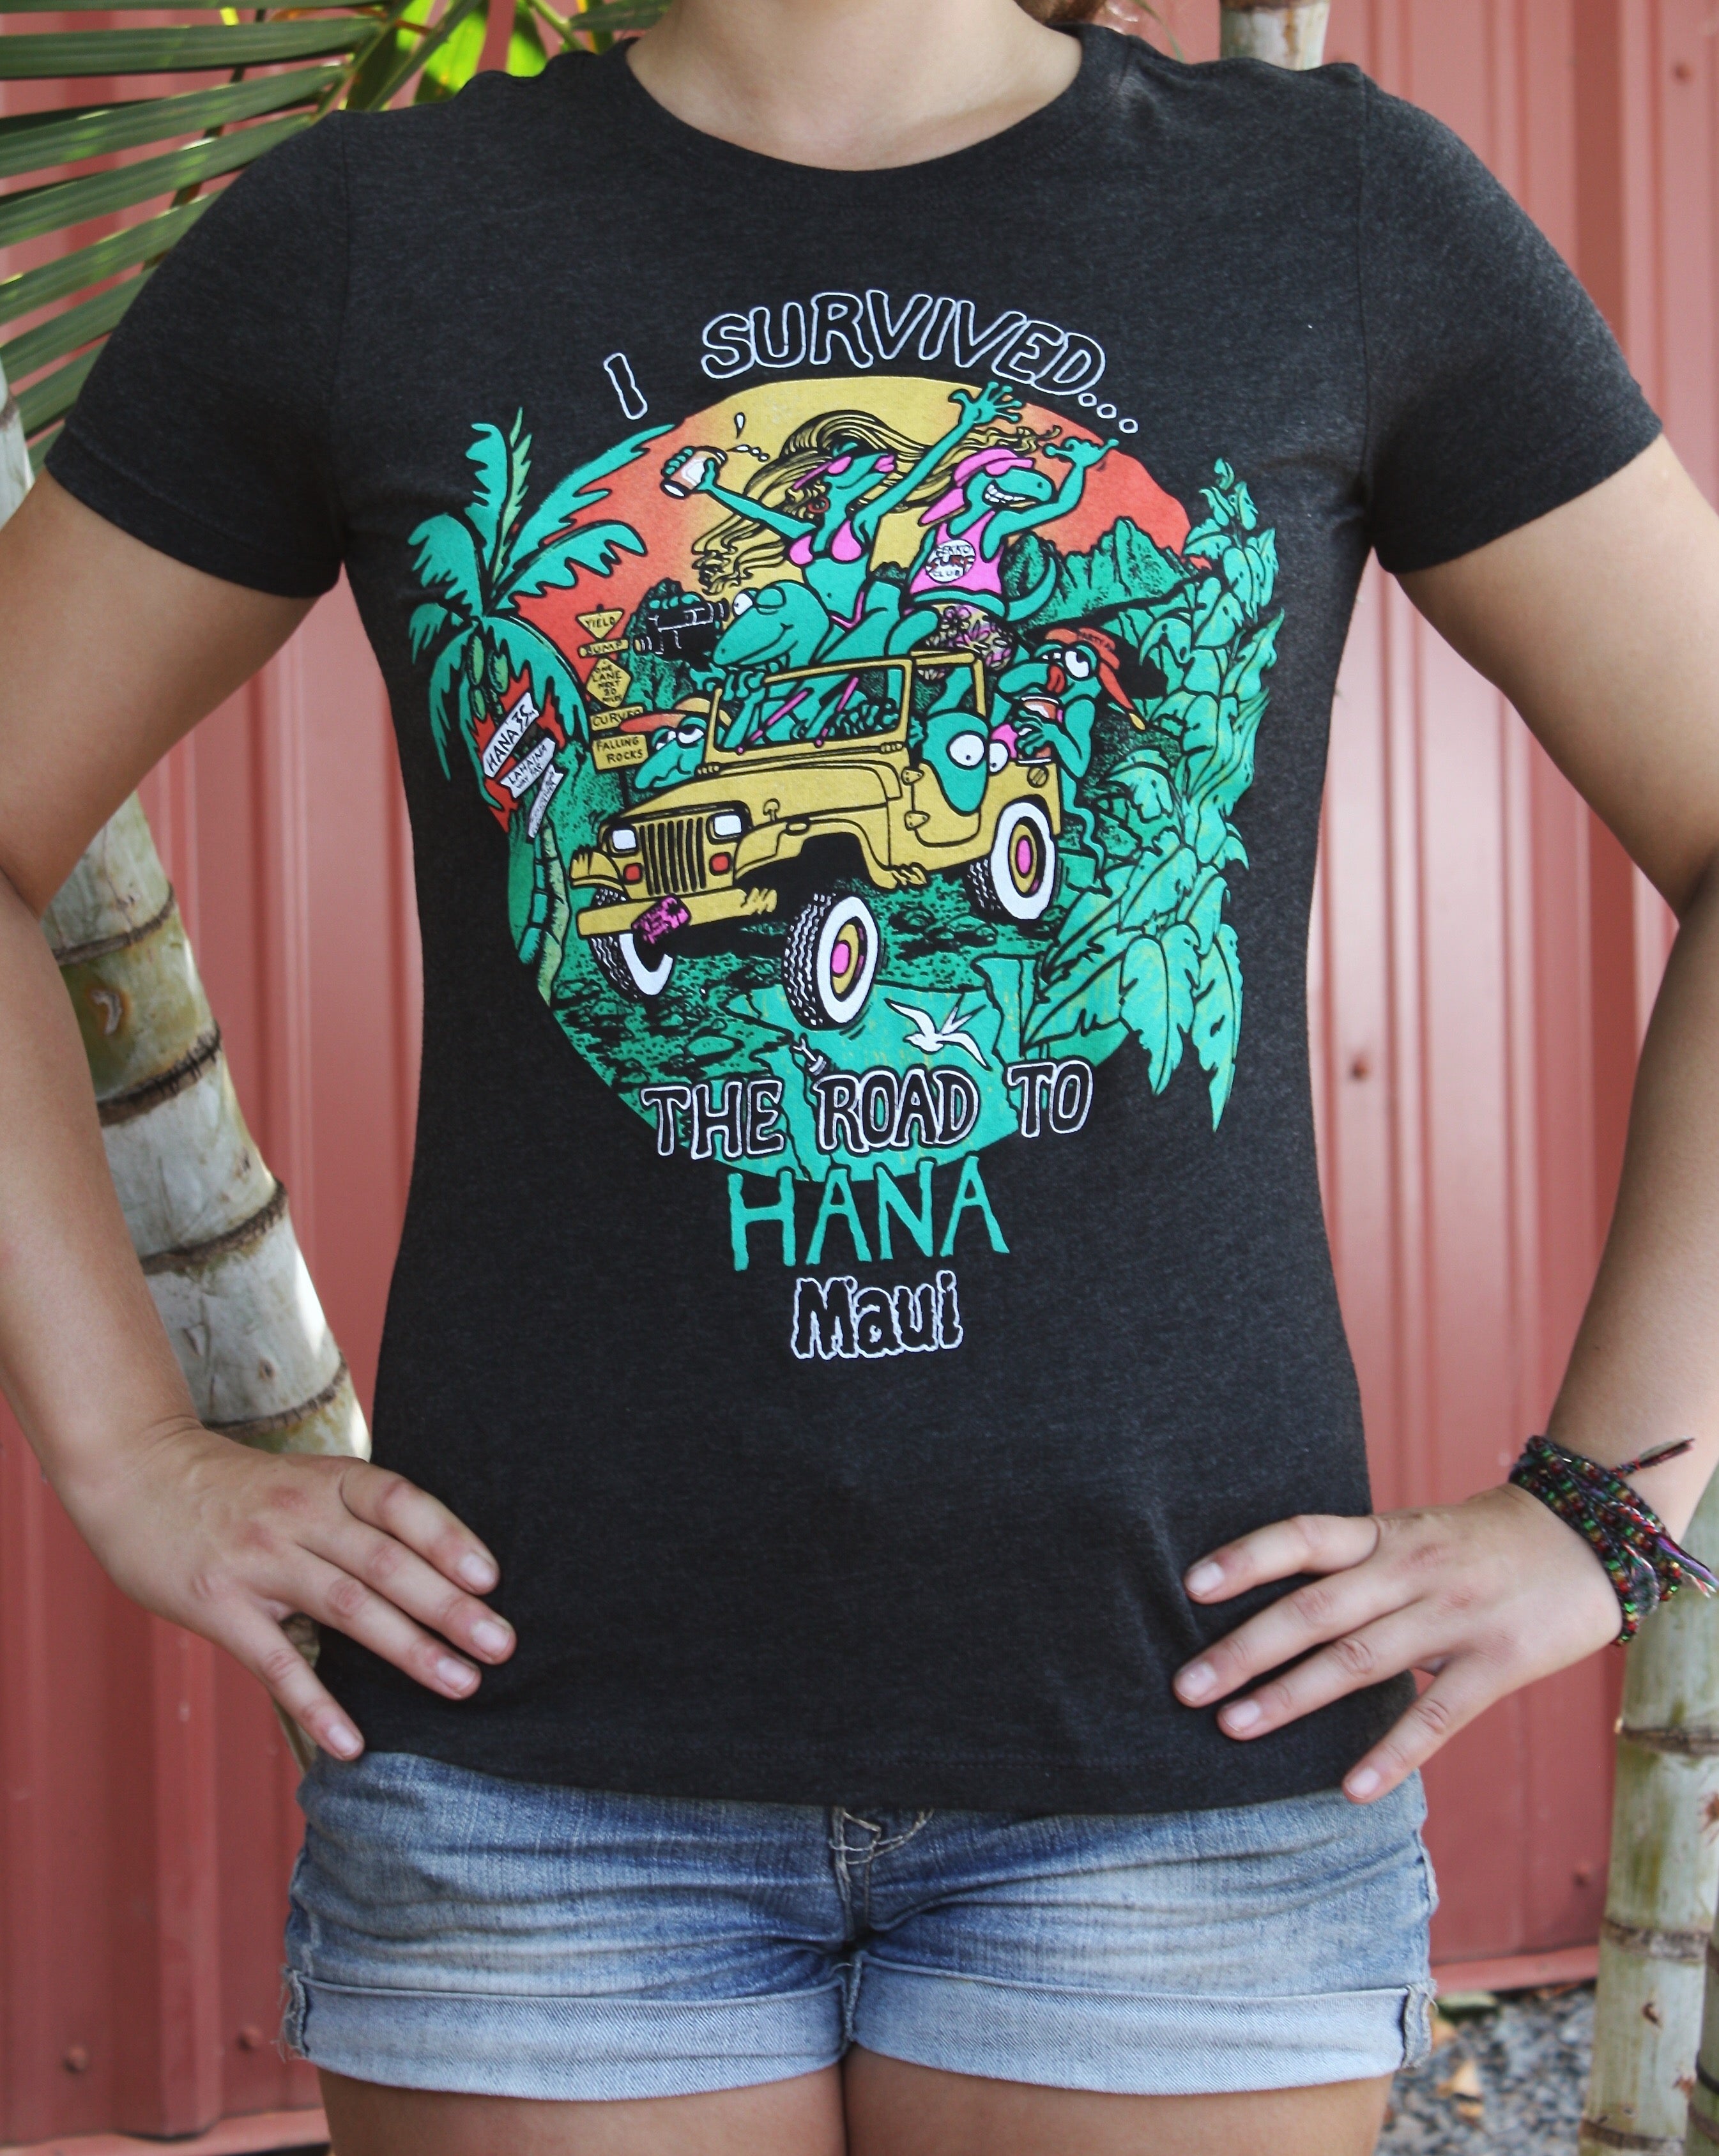 Women's "I Survived The Road To Hana" Tee